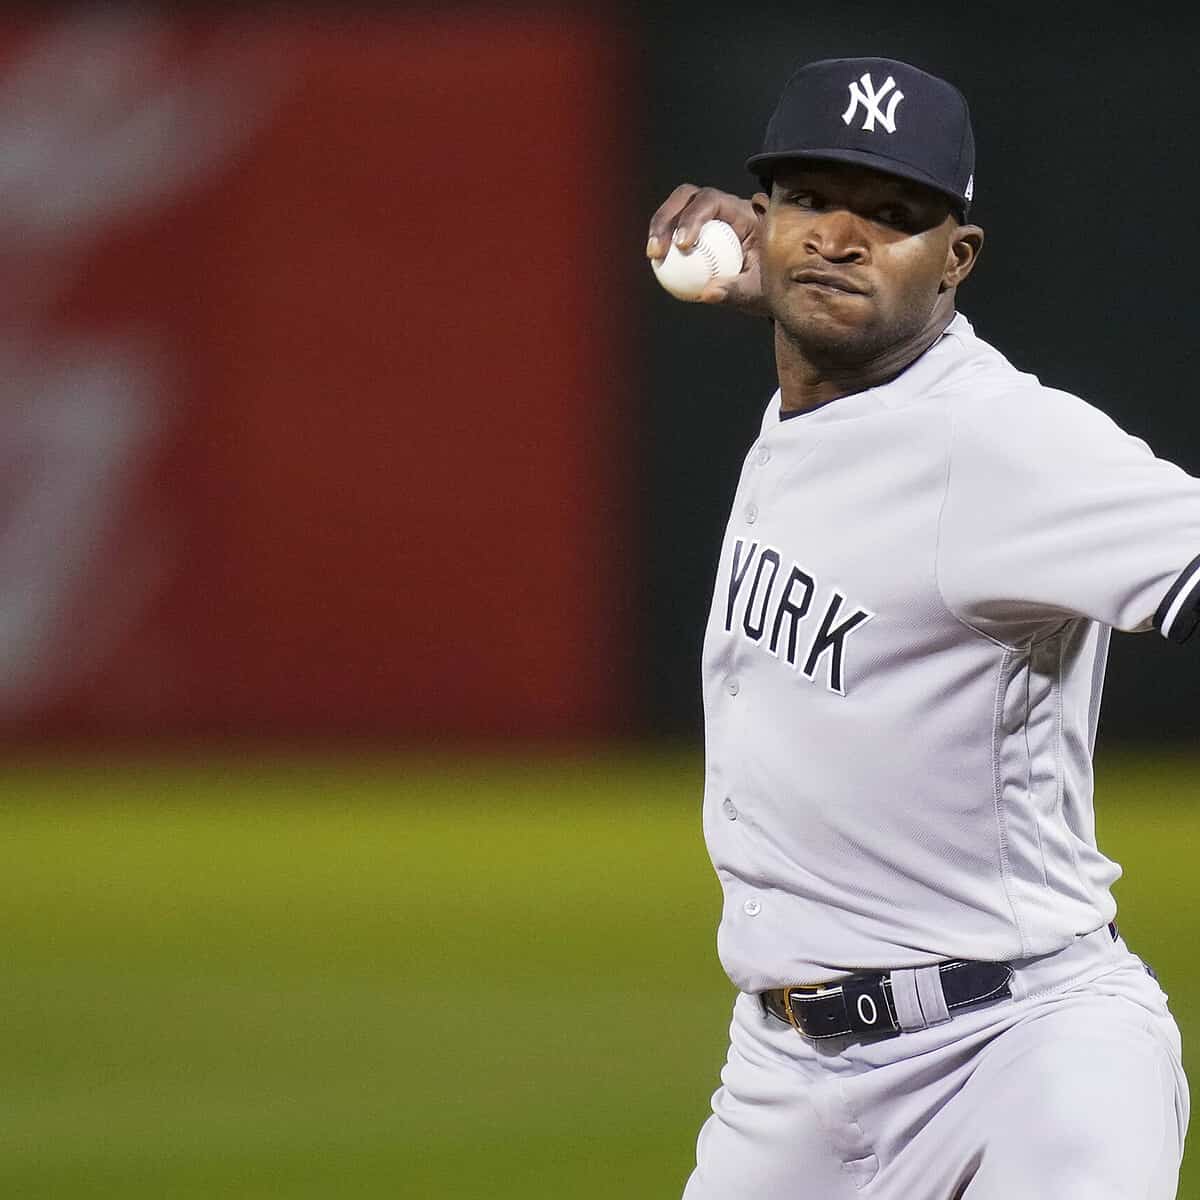 Yankees pitcher Domingo German entering treatment for alcohol abuse